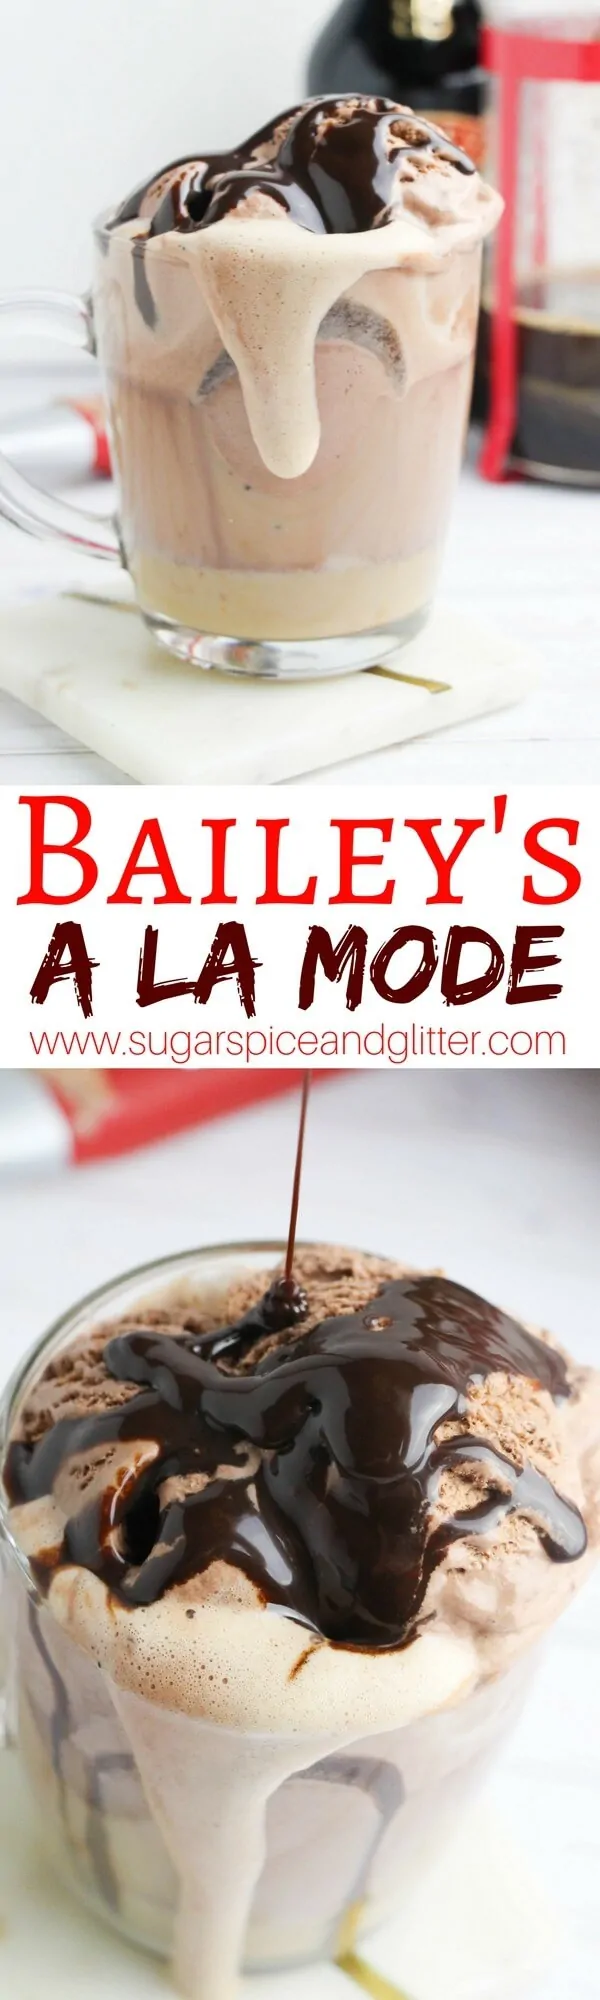 Bailey’s Coffee a la Mode, for the perfect dessert coffee cocktail your guests will go crazy for!